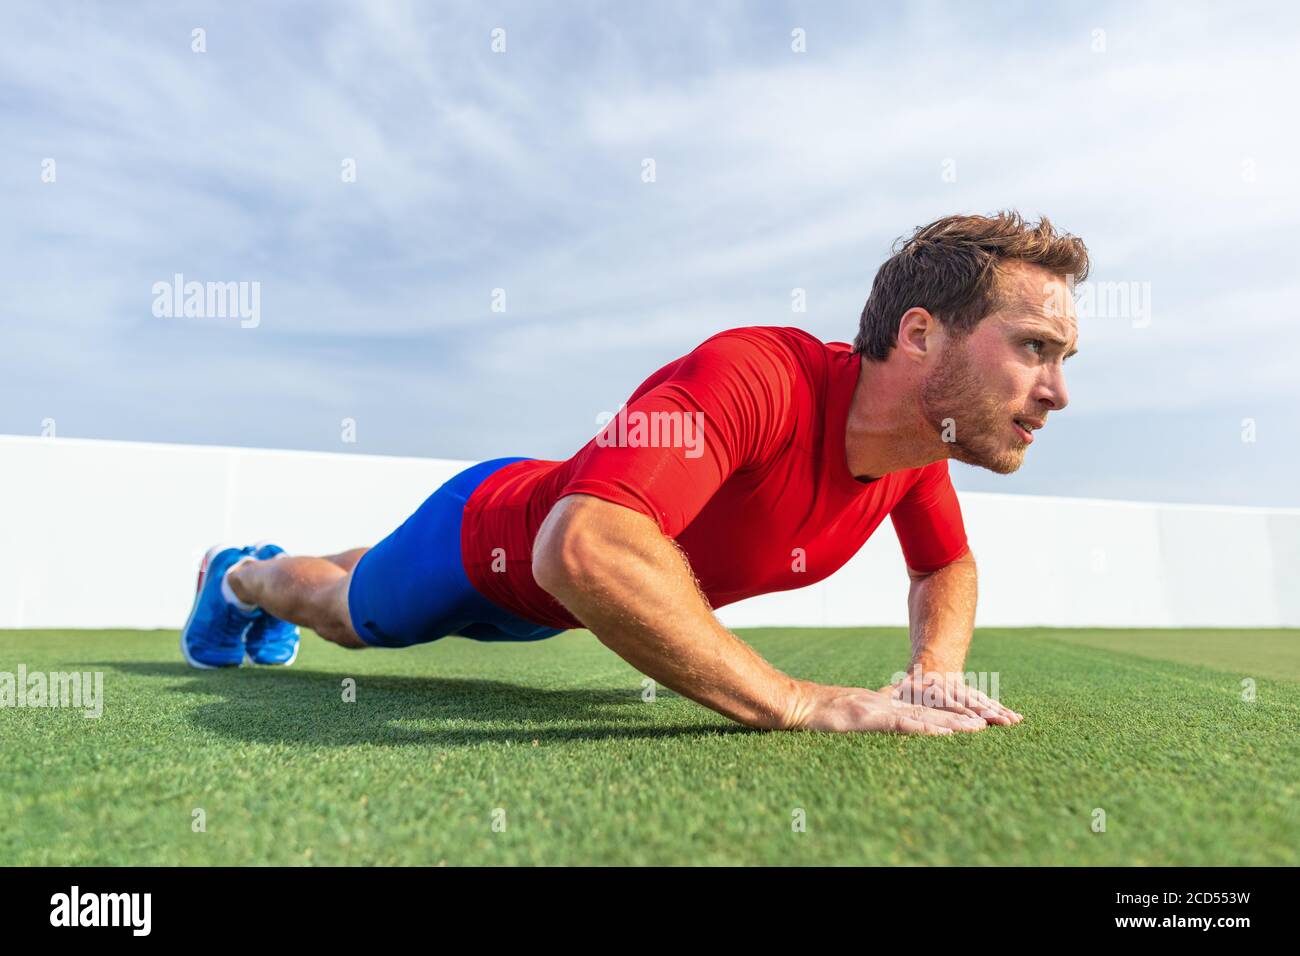 Fitness man doing diamond hand push ups exercises at outdoor grass park. Core body workout athlete planking or doing pushup Stock Photo